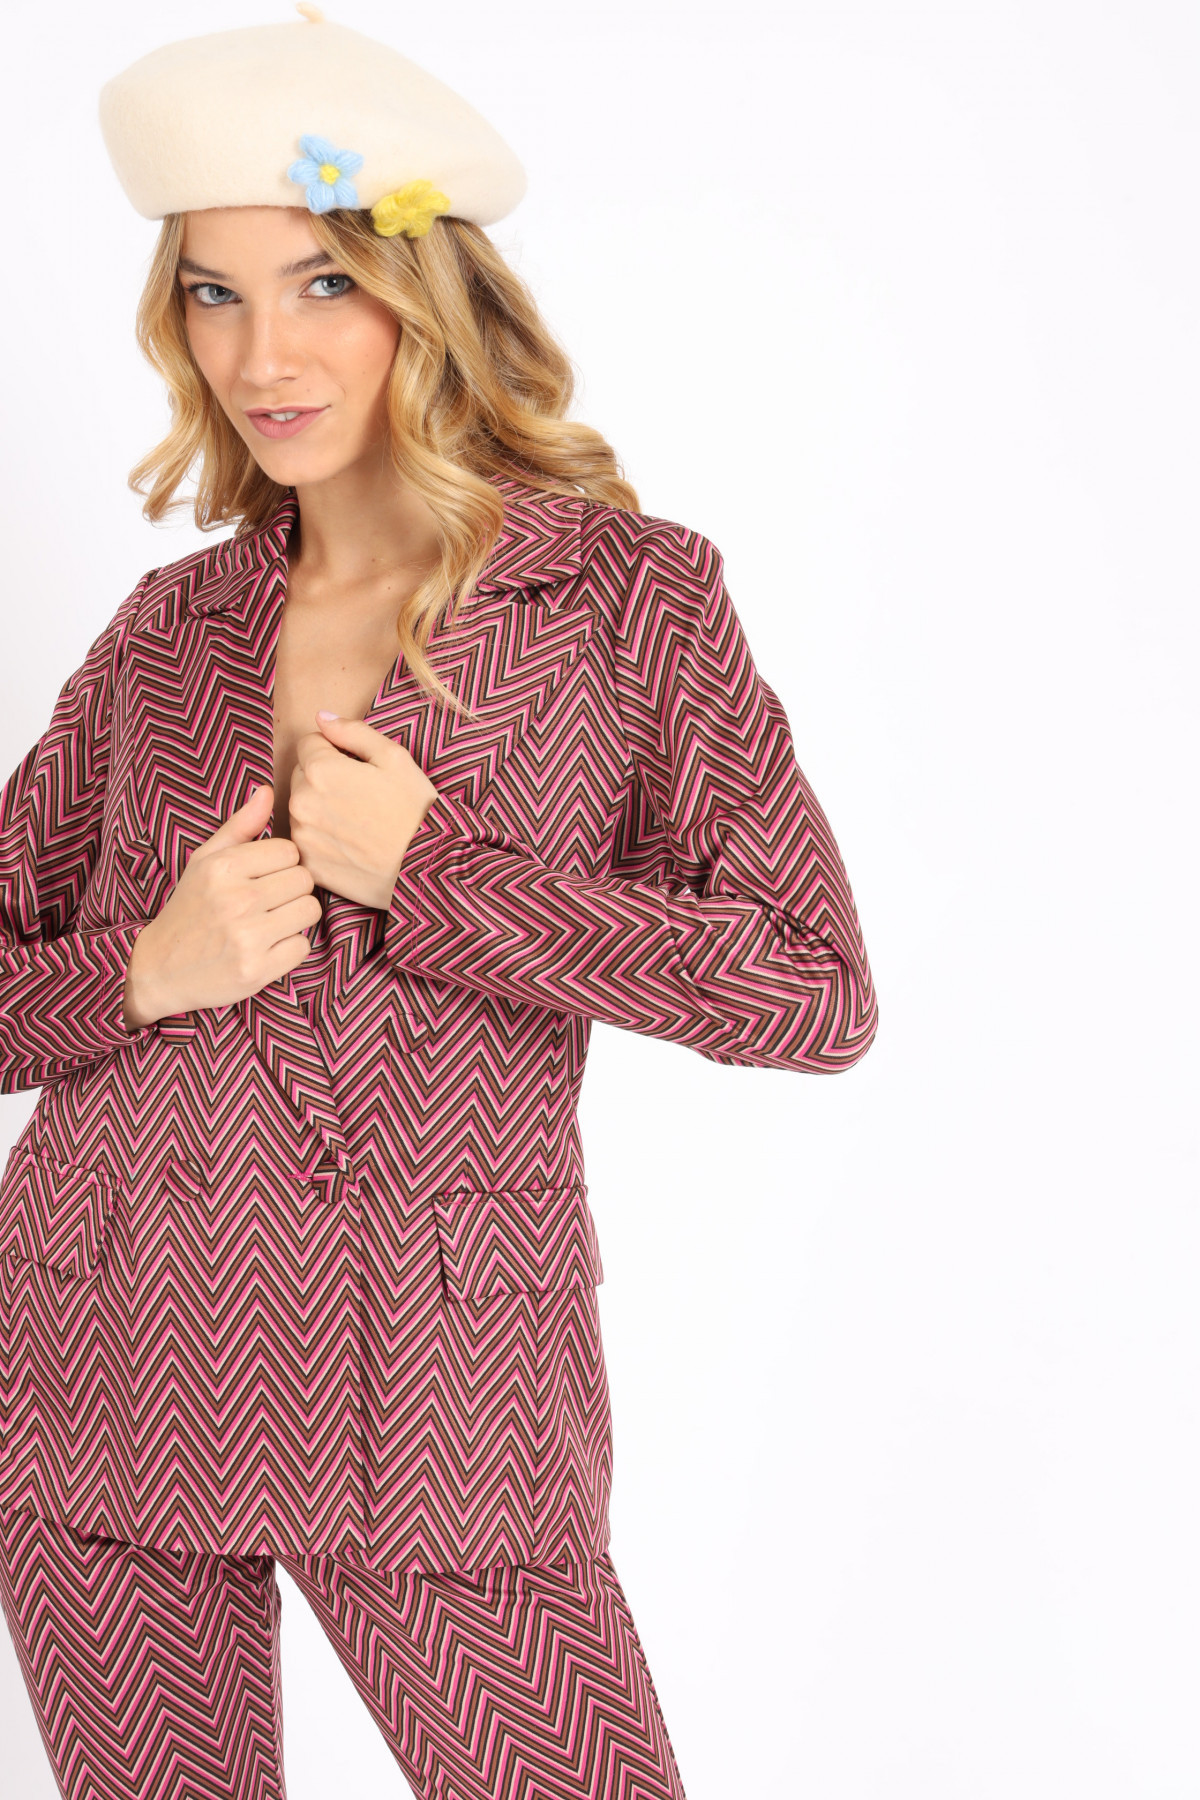 Double-Breasted Jacket with Spike Revers in Herringbone Patterned Print